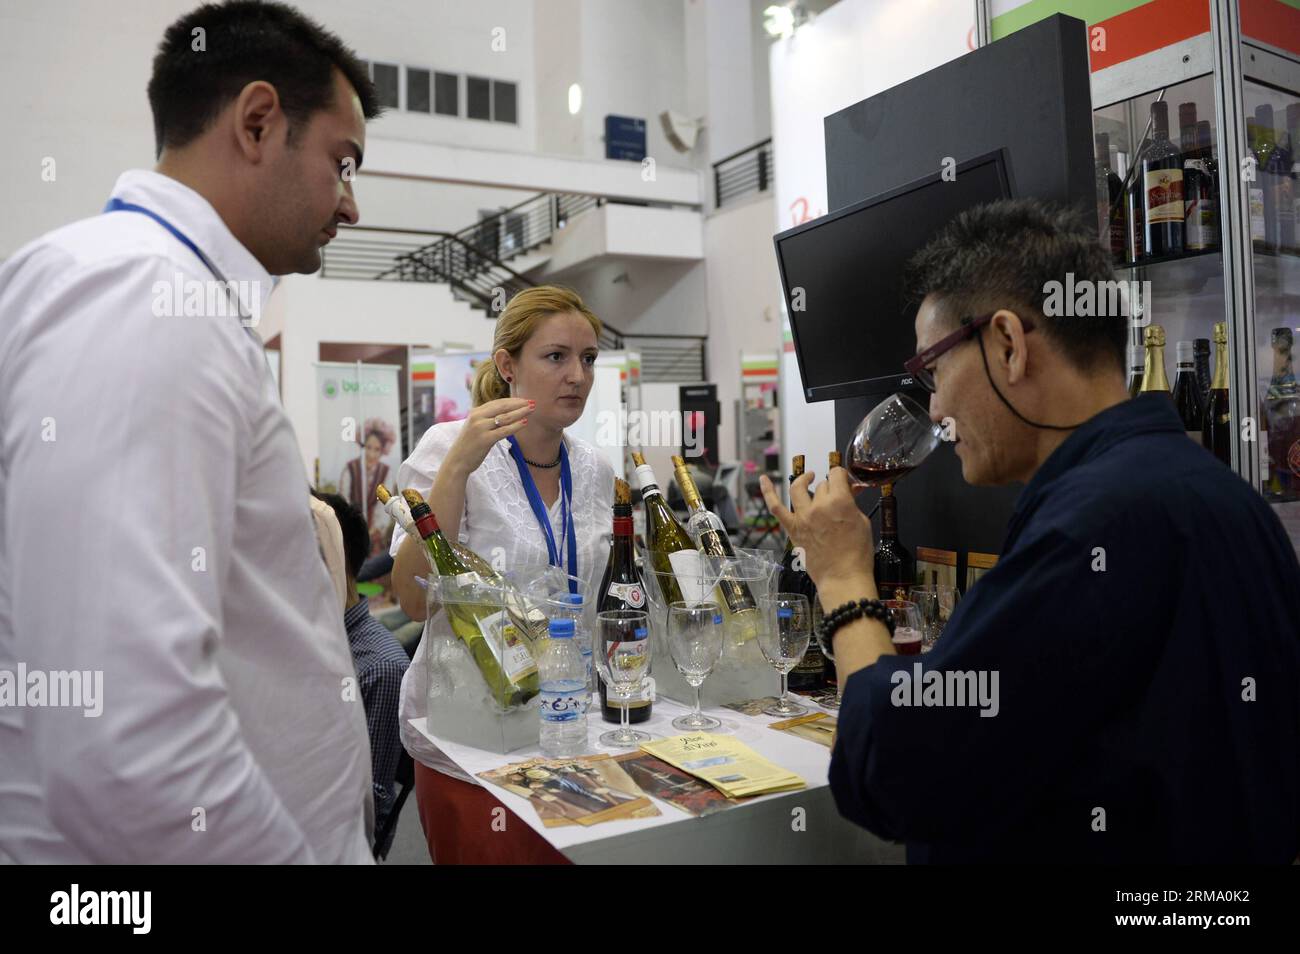 (140608) -- NINGBO, June 8, 2014 (Xinhua) -- A visitor savours Bulgarian wine at the 2014 Central and Eastern European Countries Products Fair (CEEC Fair) in Ningbo, east China s Zhejiang Province, June 8, 2014. Opening Sunday in Ningbo, the 2014 CEEC Fair attracted 180 exhibitors from 16 Central and Eastern European countries. The fair is part of the 2014 China Ningbo-CEEC Economic and Cultural Exchange Week. (Xinhua/Ju Huanzong) (lmm) CHINA-ZHEJIANG-NINGBO-CEEC FAIR (CN) PUBLICATIONxNOTxINxCHN   Ningbo June 8 2014 XINHUA a Visitor savors Bulgarian Wine AT The 2014 Central and Eastern Europea Stock Photo